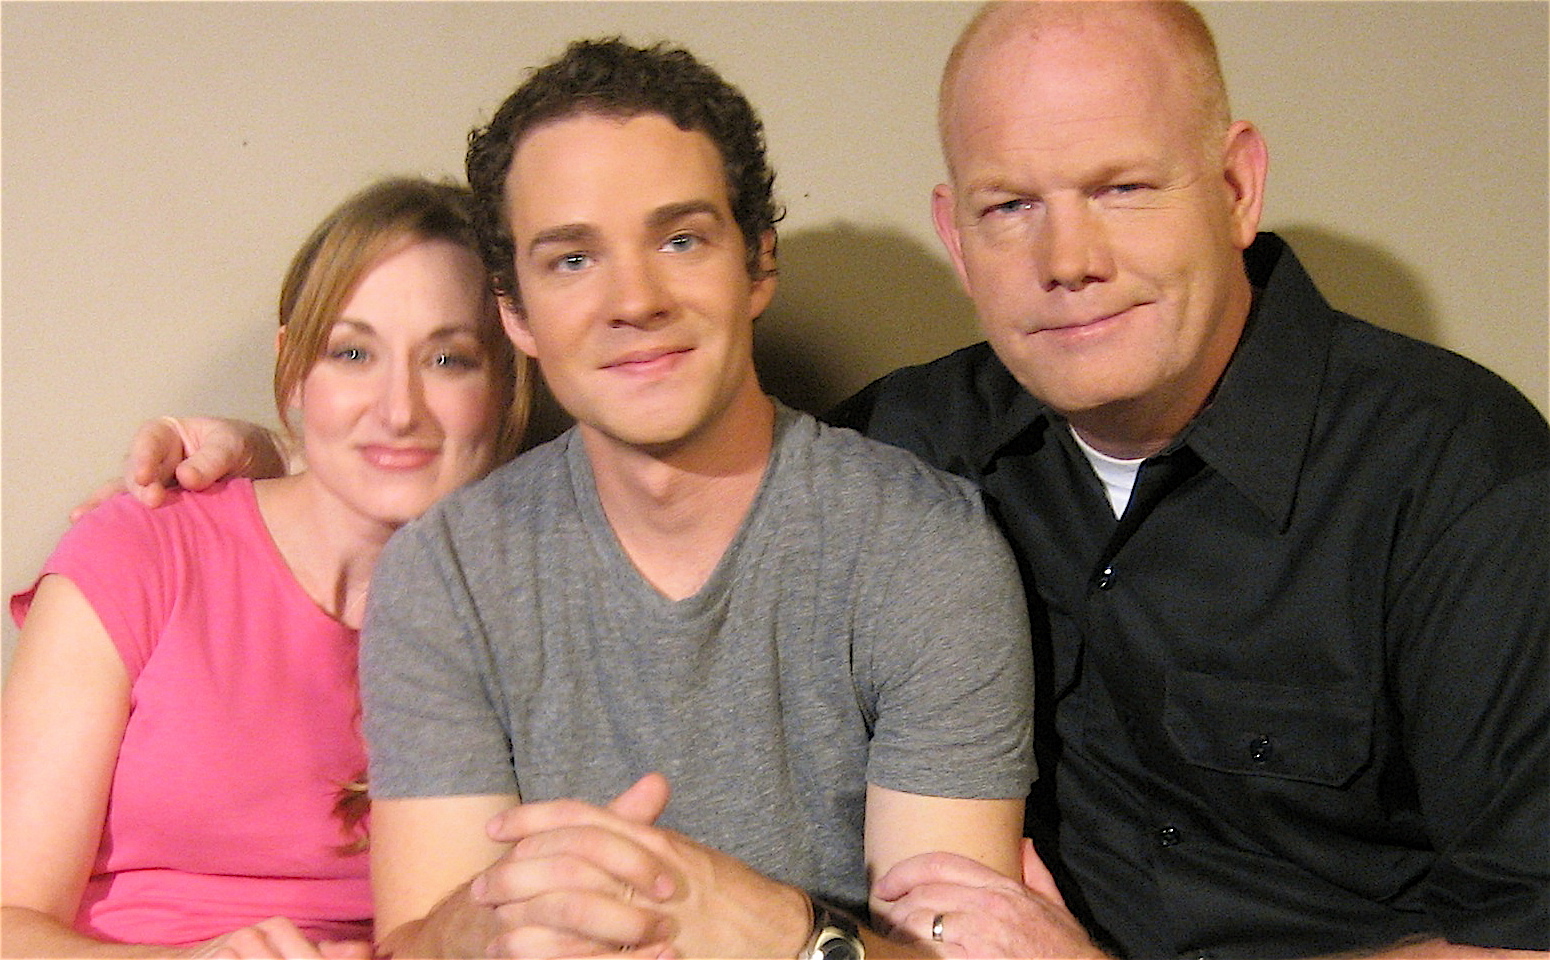 Kimberly Durrett with on-screen husband, Transformers' Charlie Bodin, and 24's Glenn Morshower in Life, Love, and Other Four Letter Words (2009)